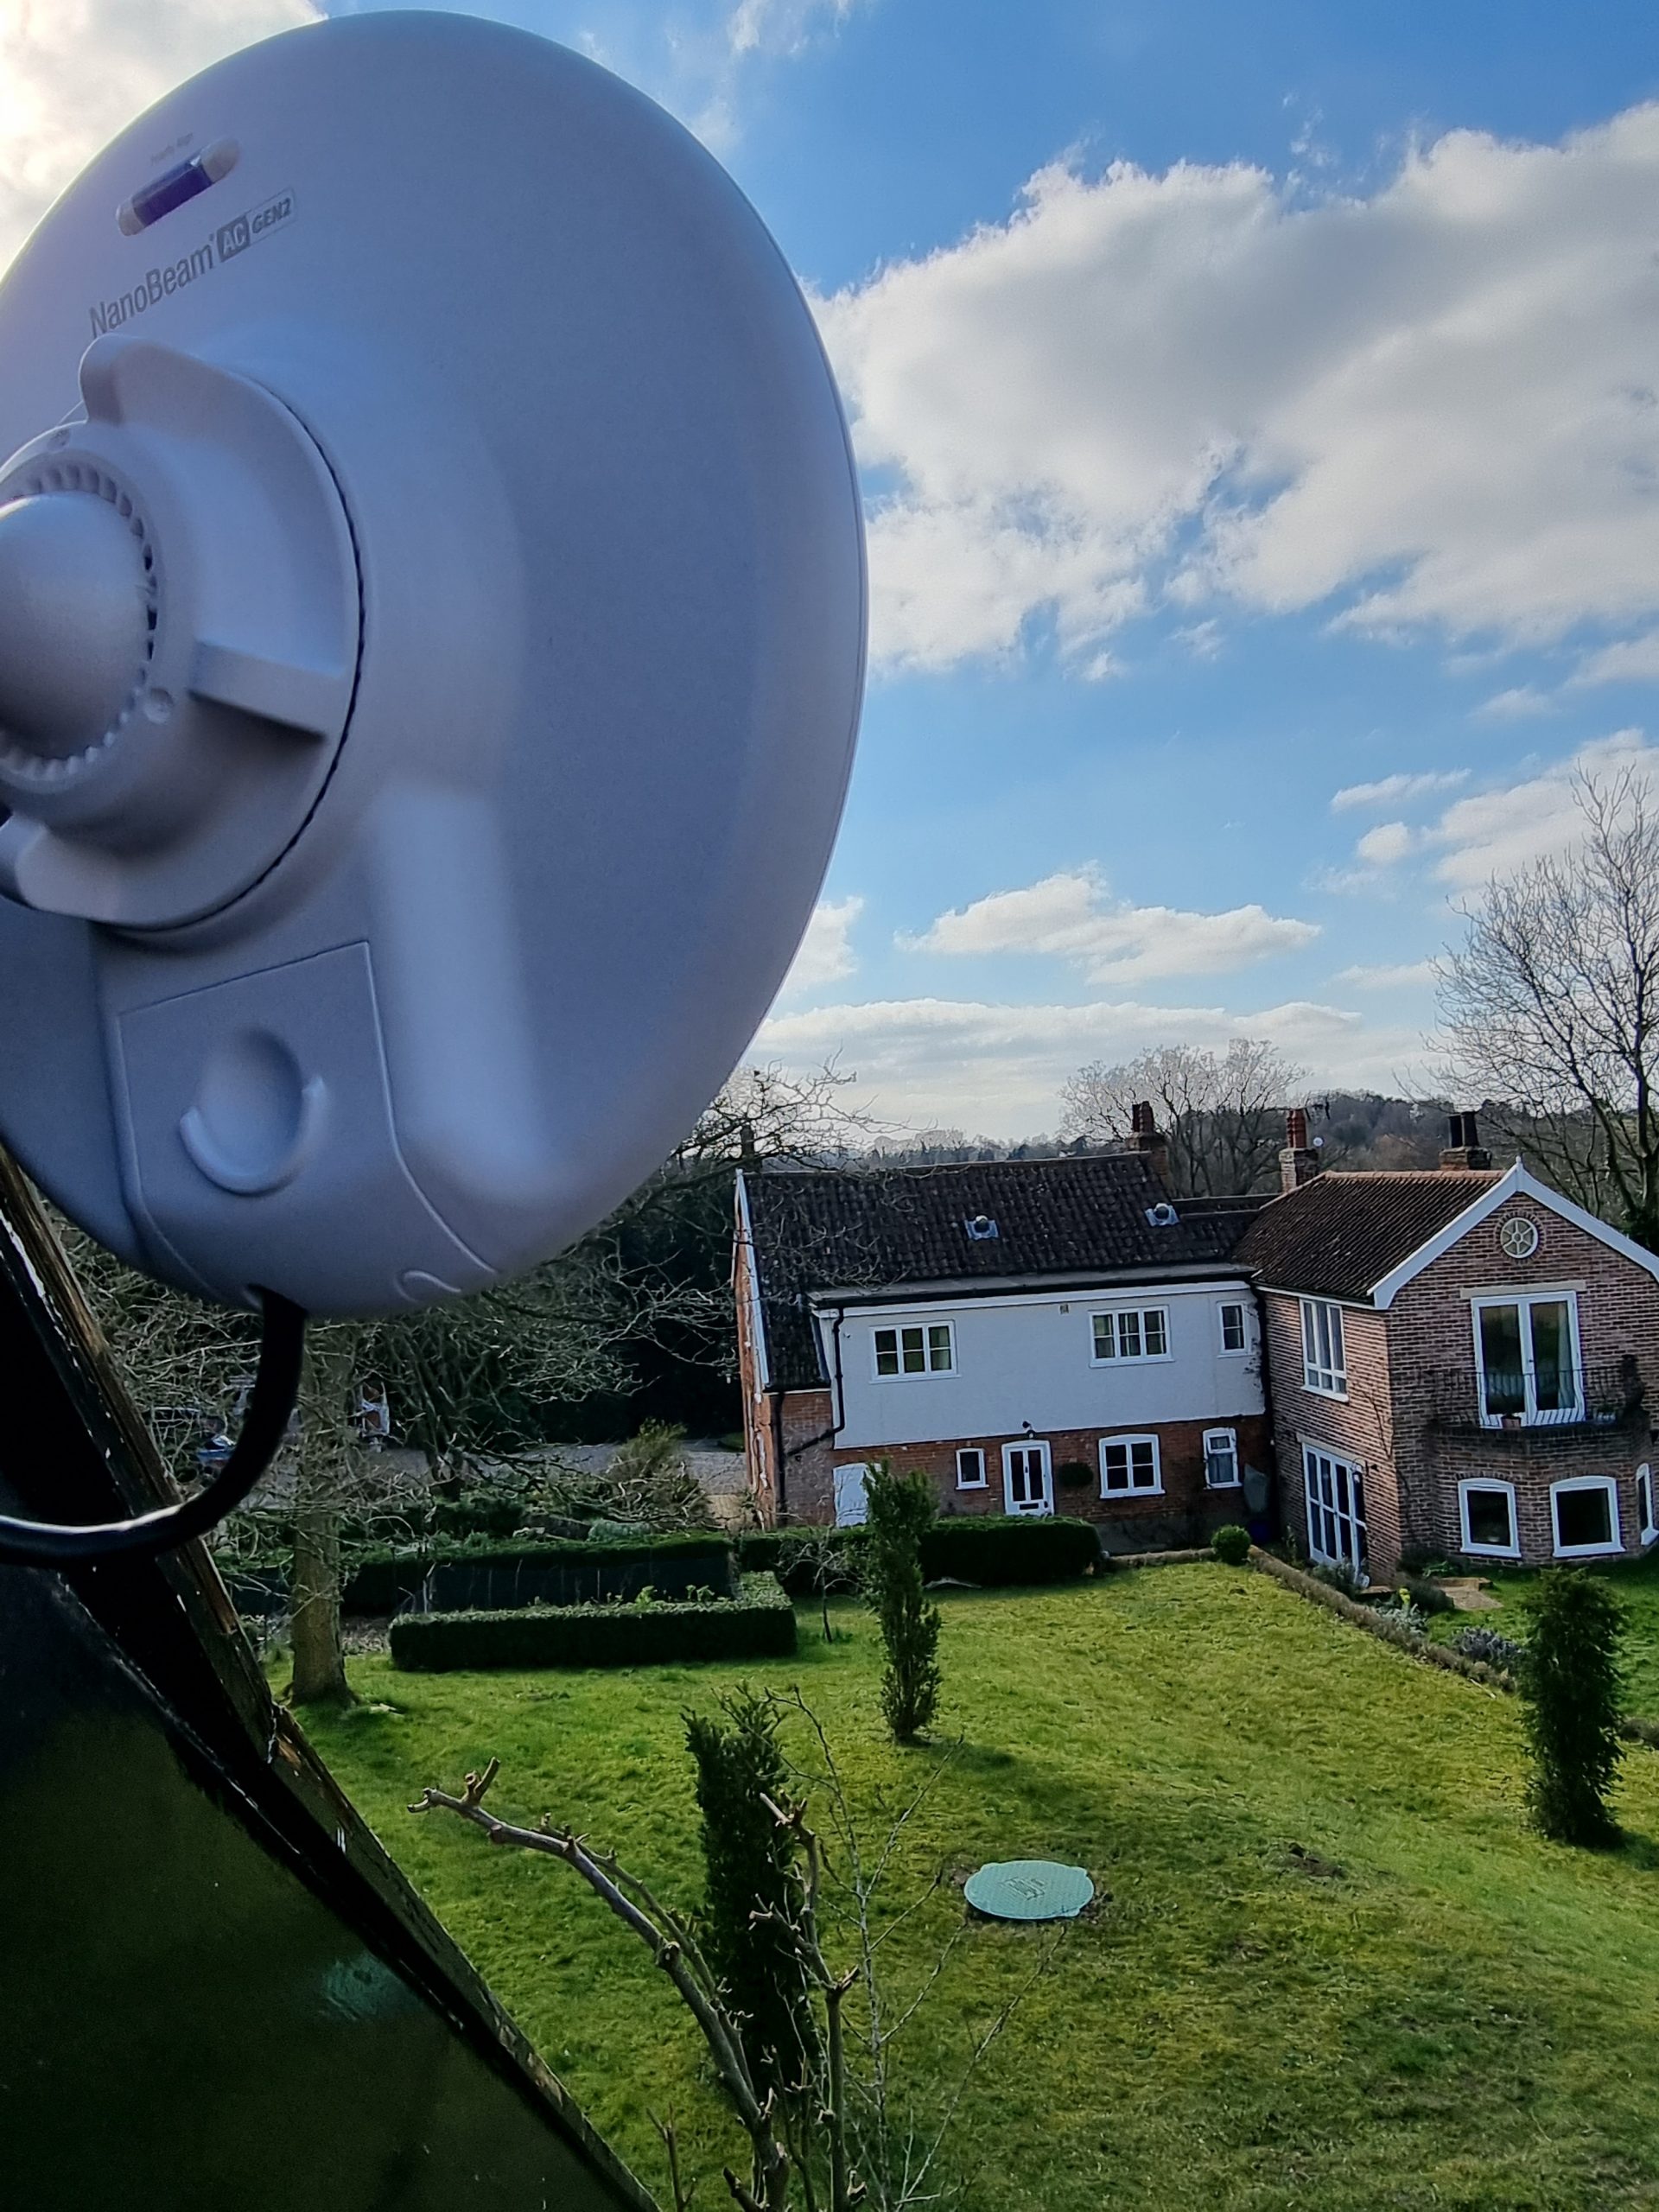 Installation of point-to-point WiFi link connecting to a house under clear blue skies, ensuring efficient connectivity and seamless integration.